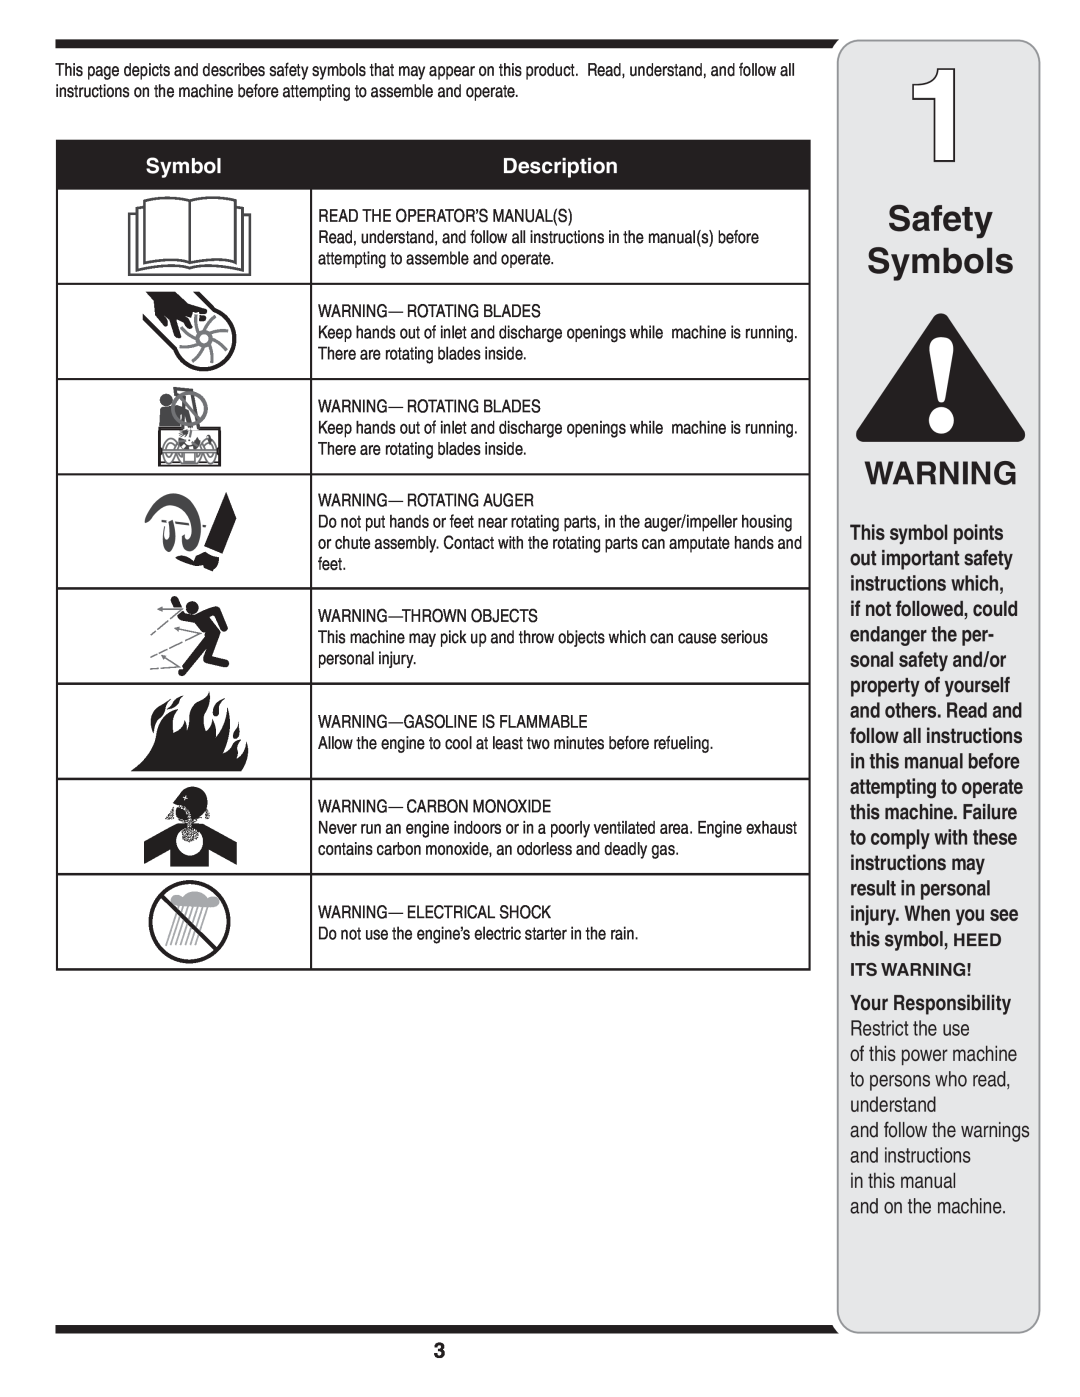 MTD 2N1 warranty Safety Symbols, Description, ITS WARNING Your Responsibility Restrict the use 